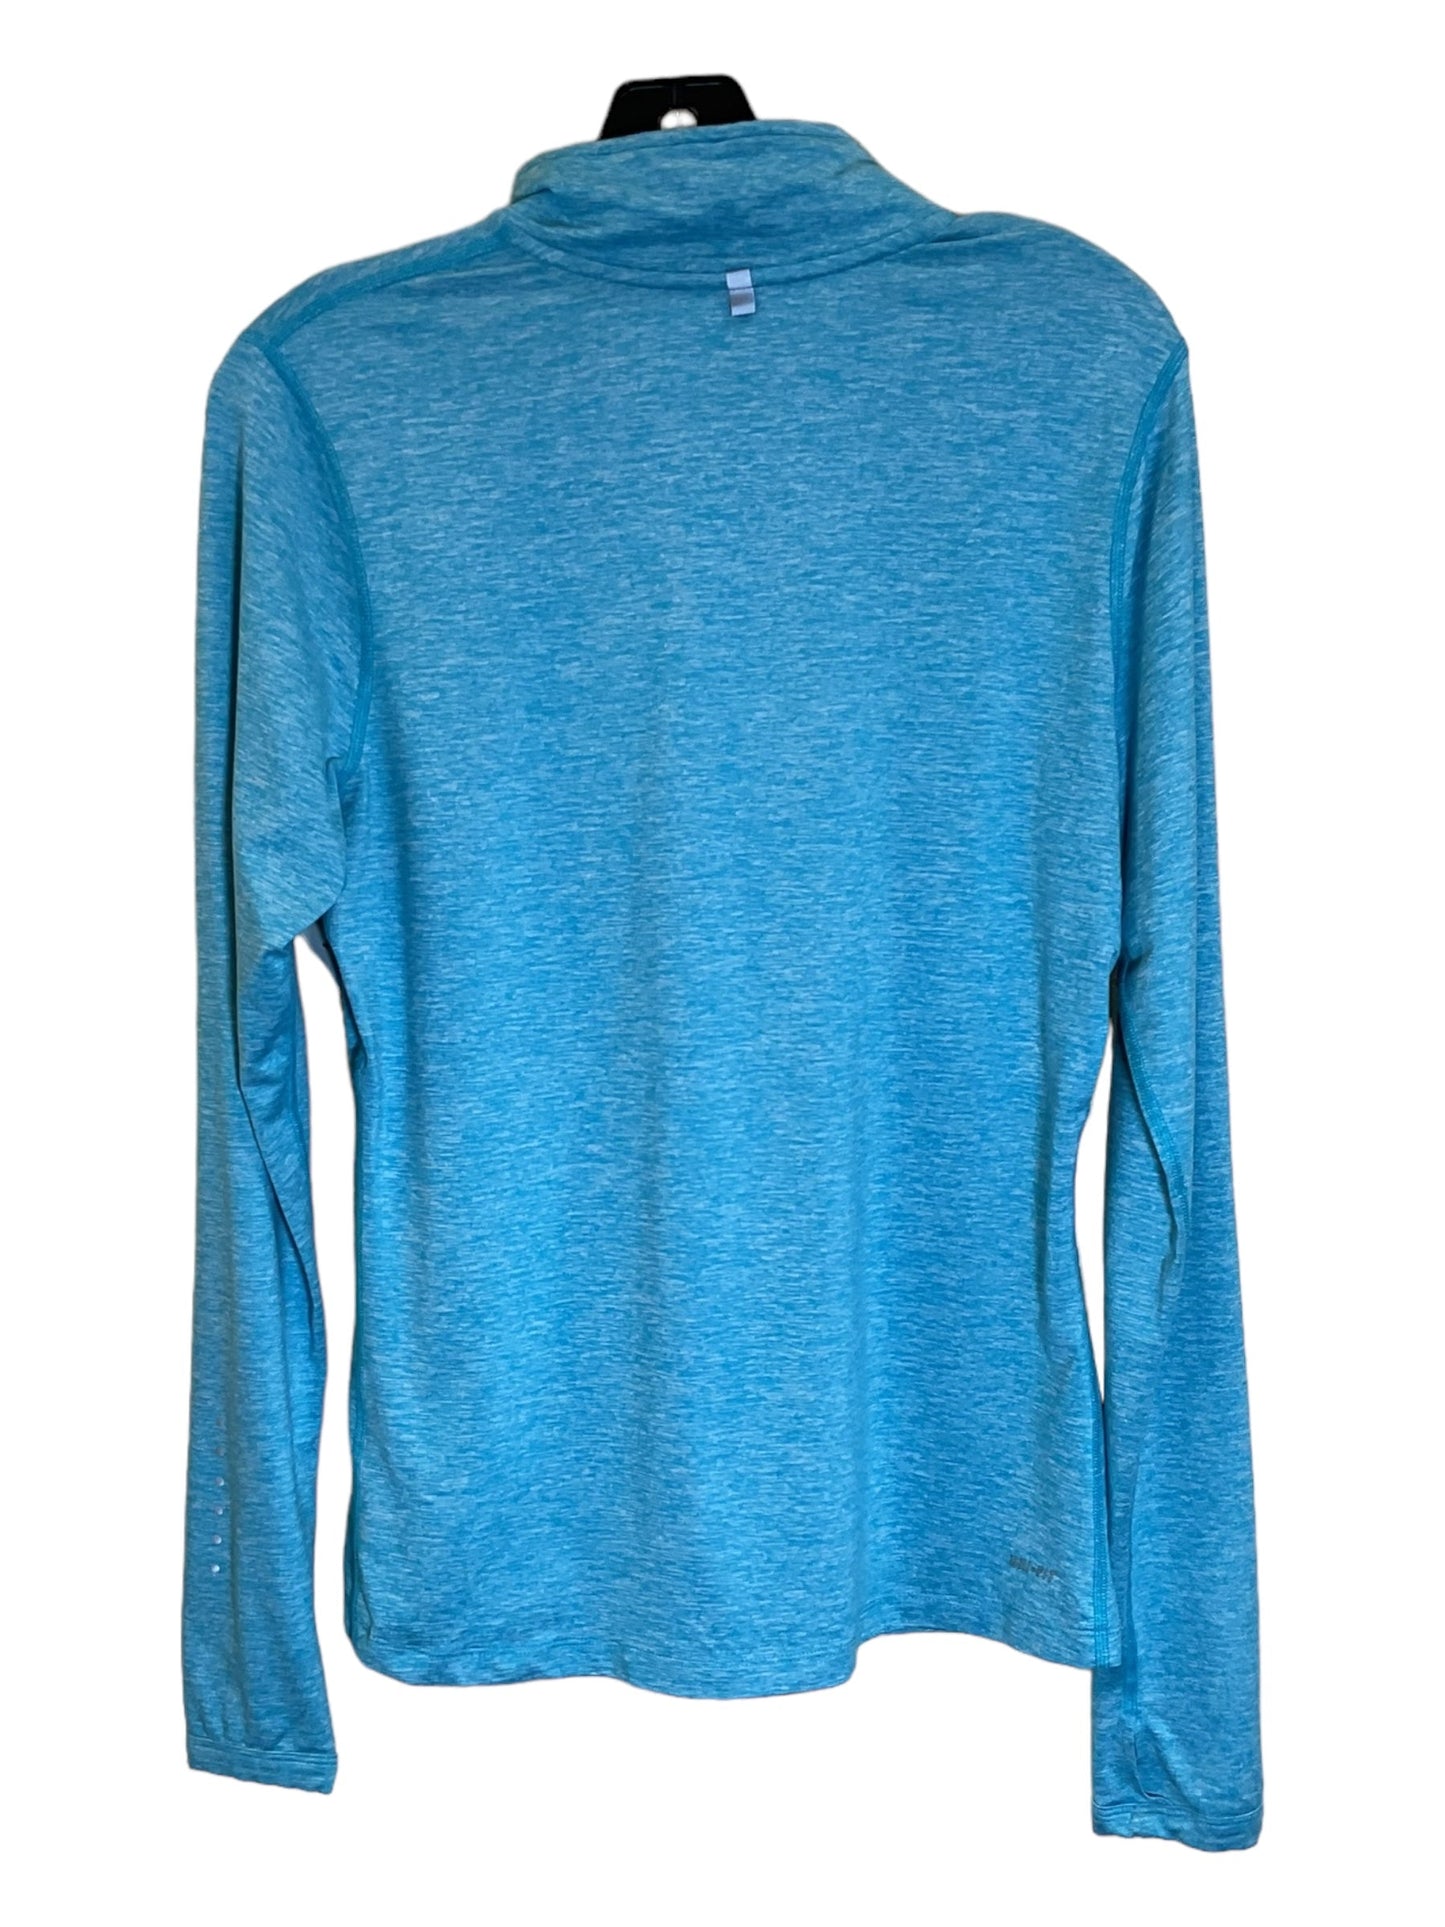 Teal Athletic Top Long Sleeve Collar Nike Apparel, Size M